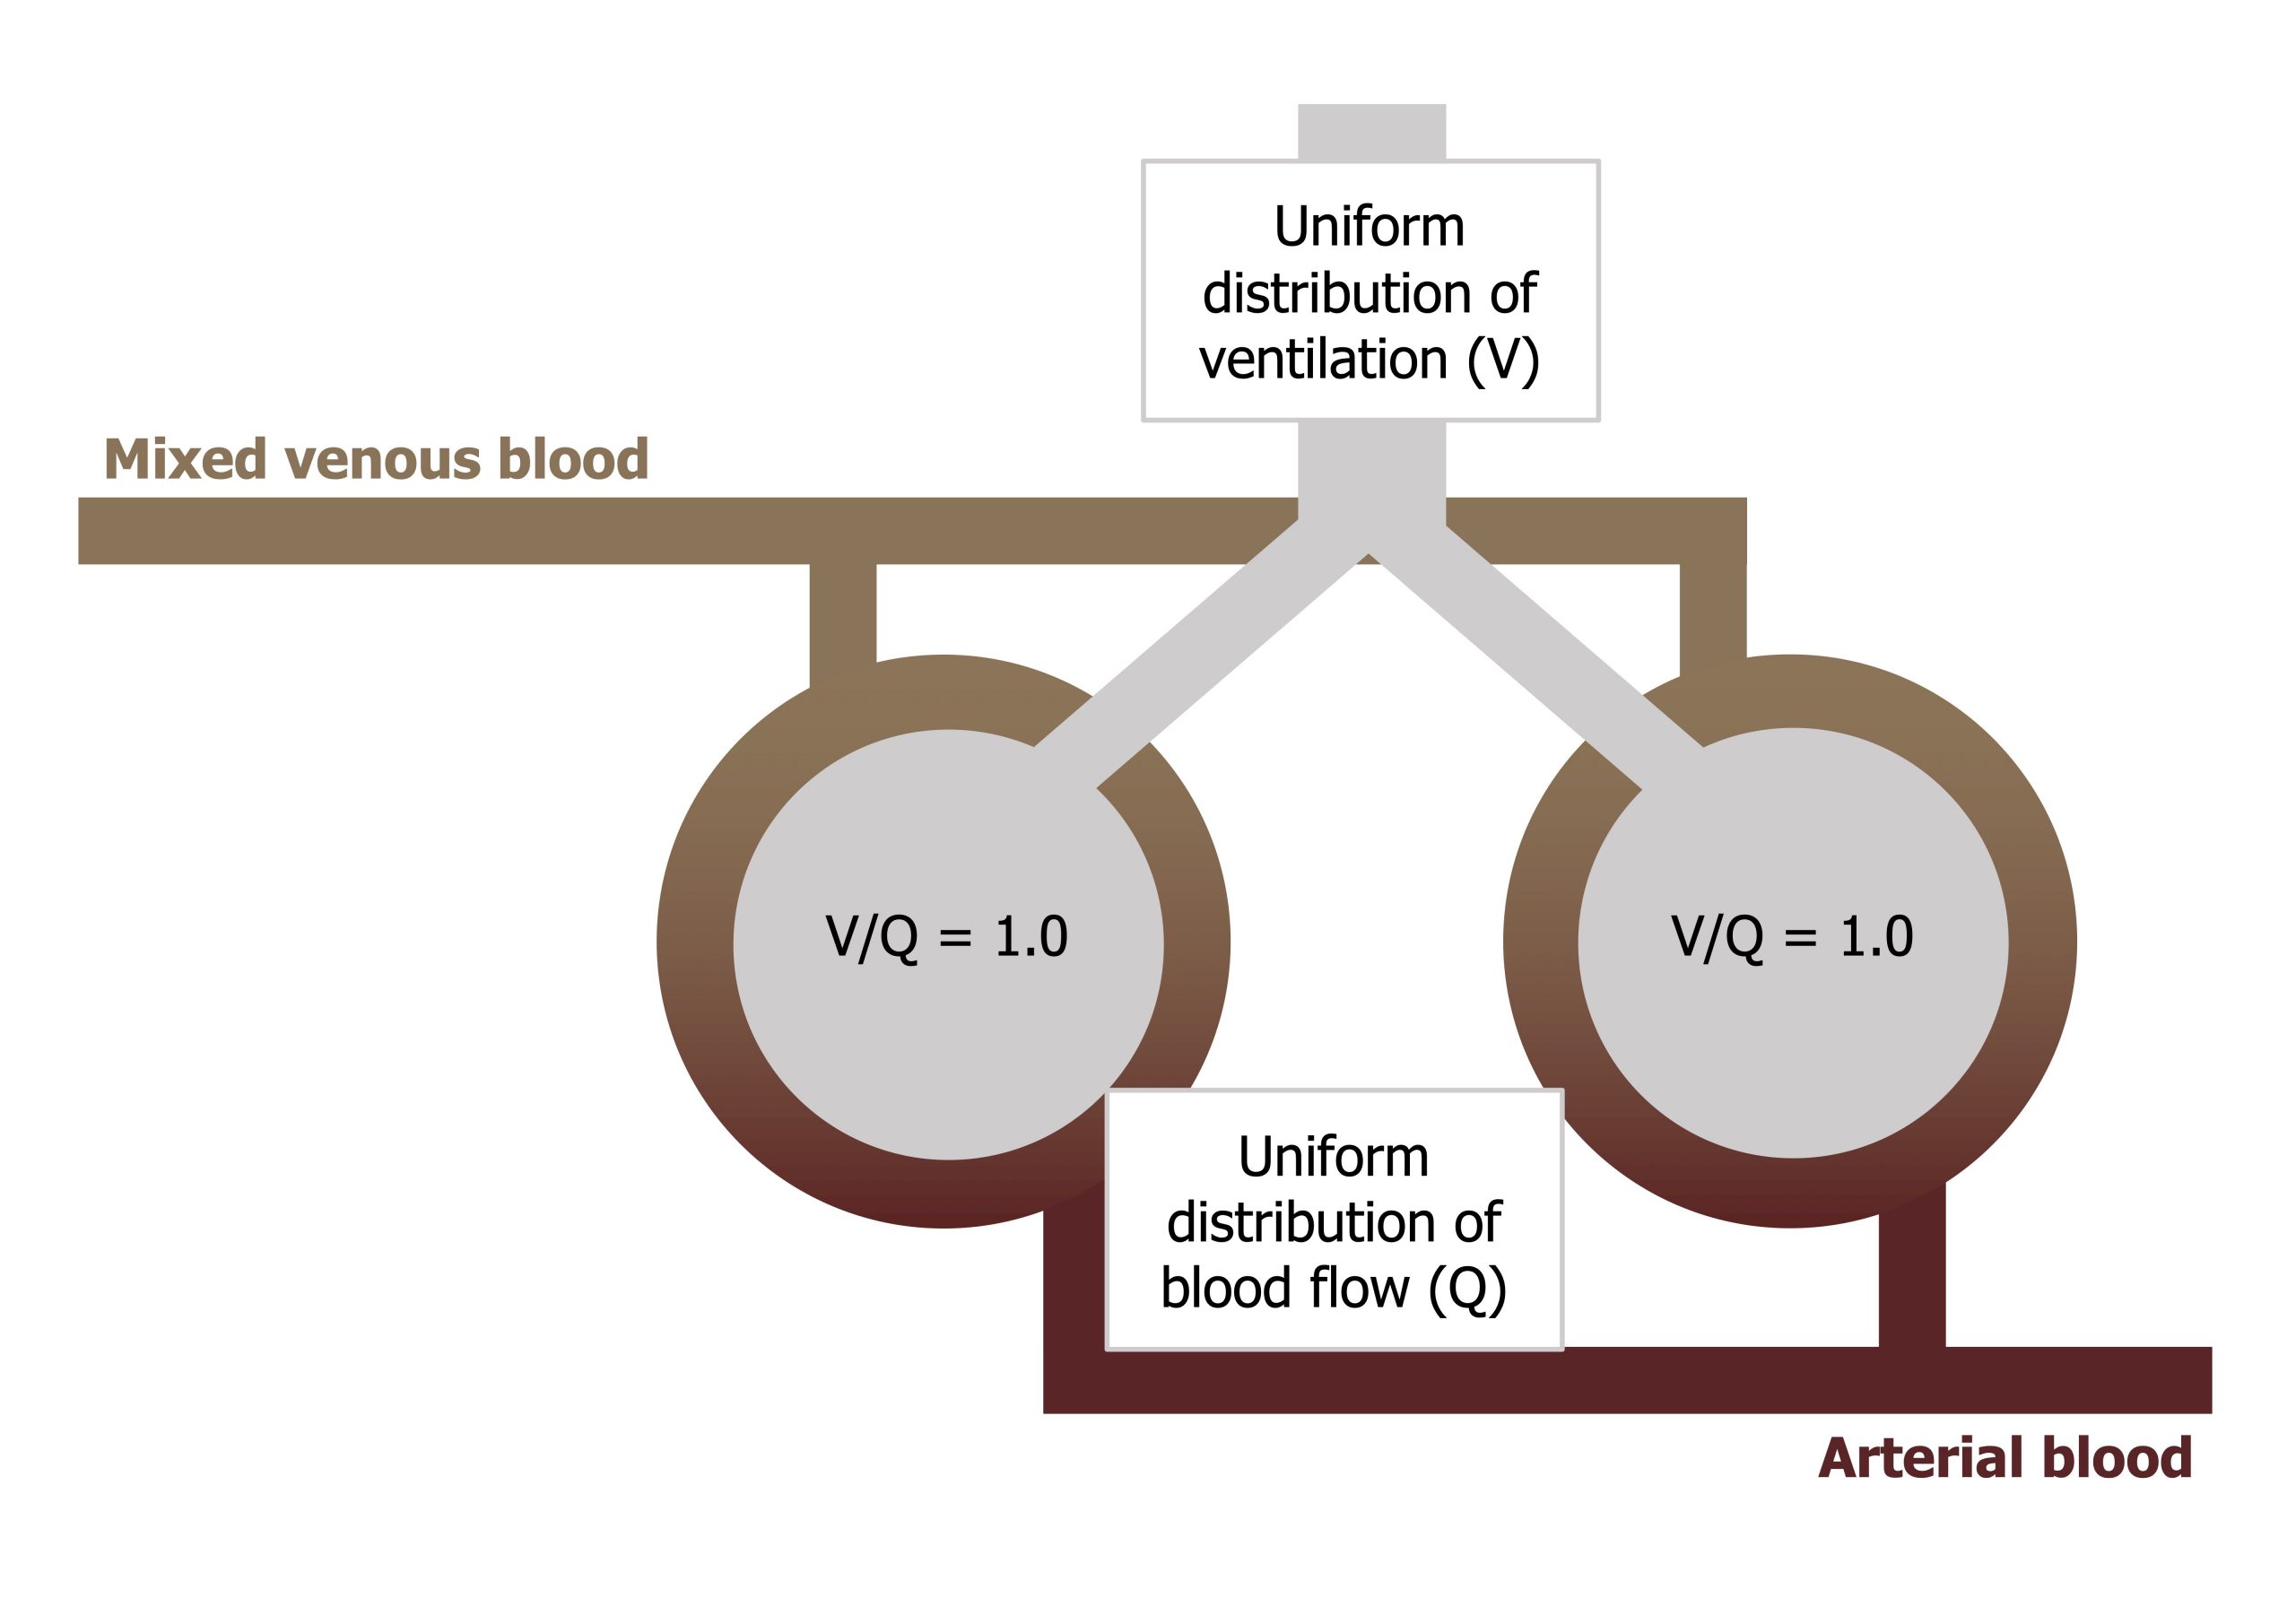 Two circular alveoli surrounded by capillaries with text inside V/Q = 1.0 connected by a branching stem with text uniform distribution of ventilation (V). Mixed venous blood enters both alveoli’s capillaries at the top and arterial blood leaving from the bottom. Text above arterial blood states uniform distribution of blood flow (Q)